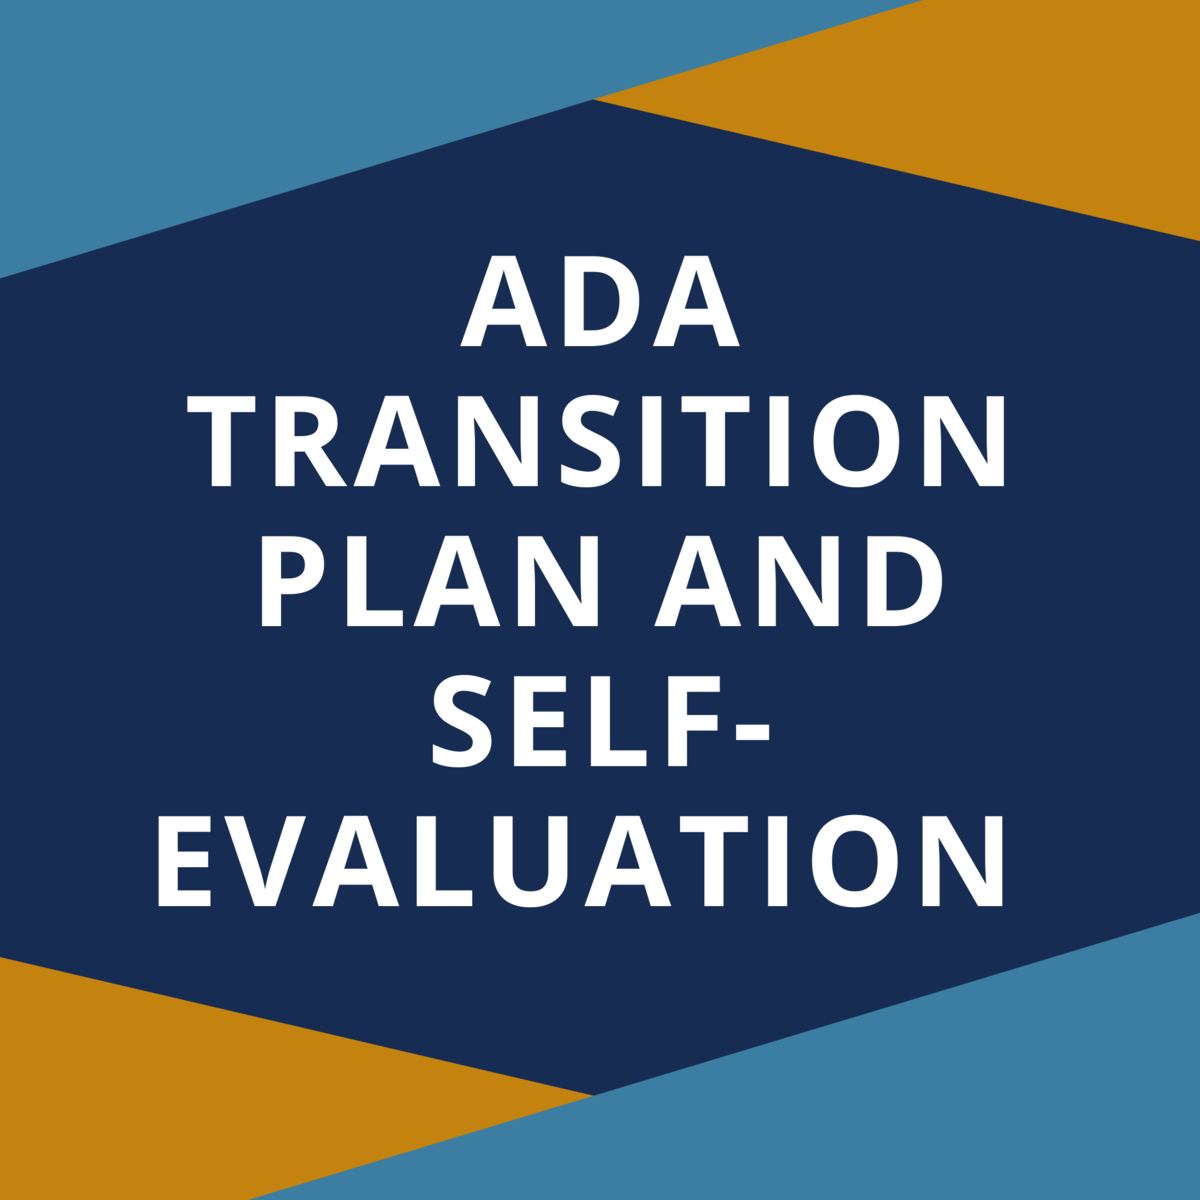 ADA Transition Plan and Self-Evaluation